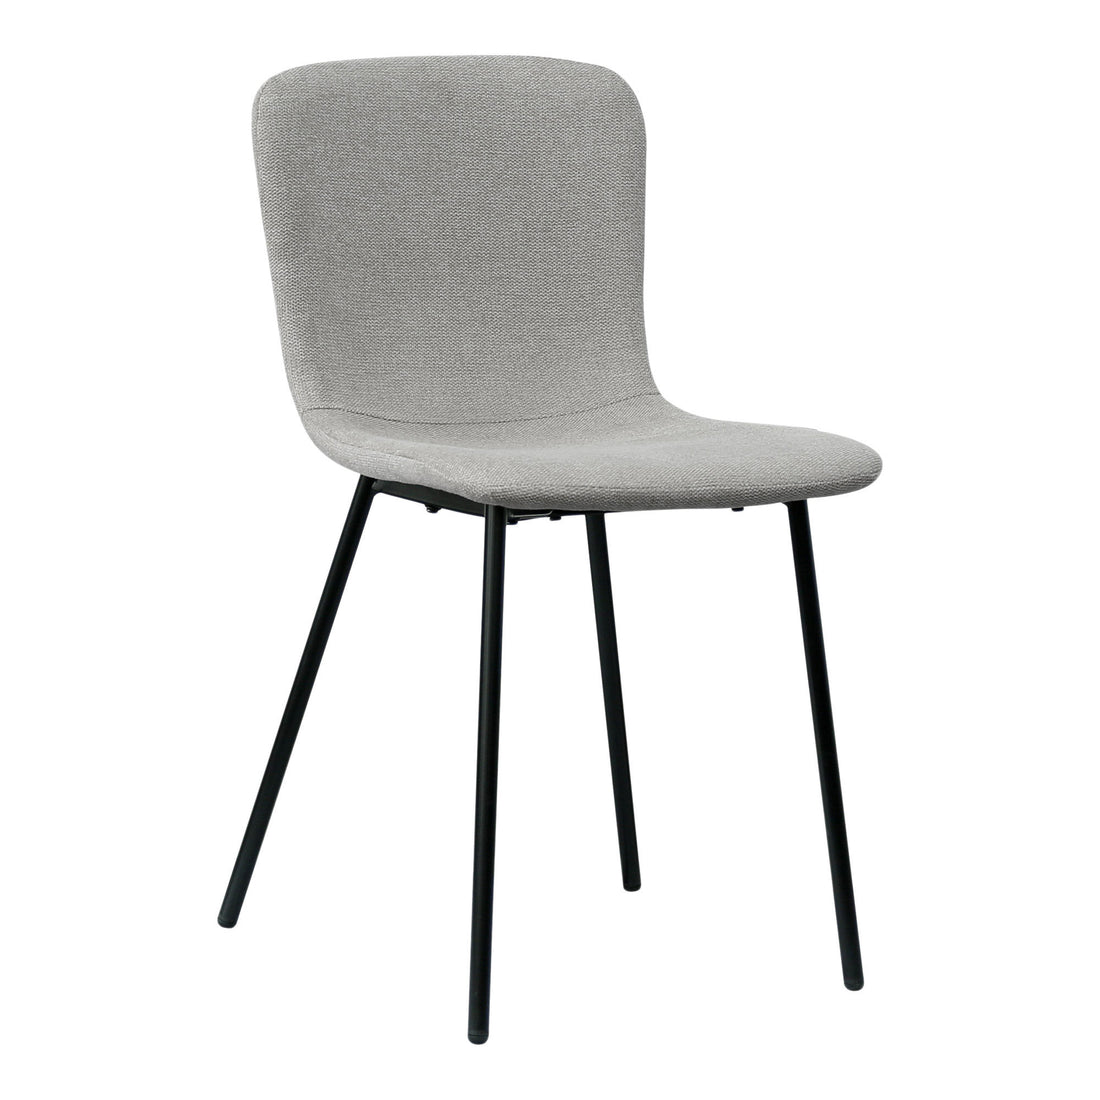 House Nordic Halden Dining Chair - Set of 2